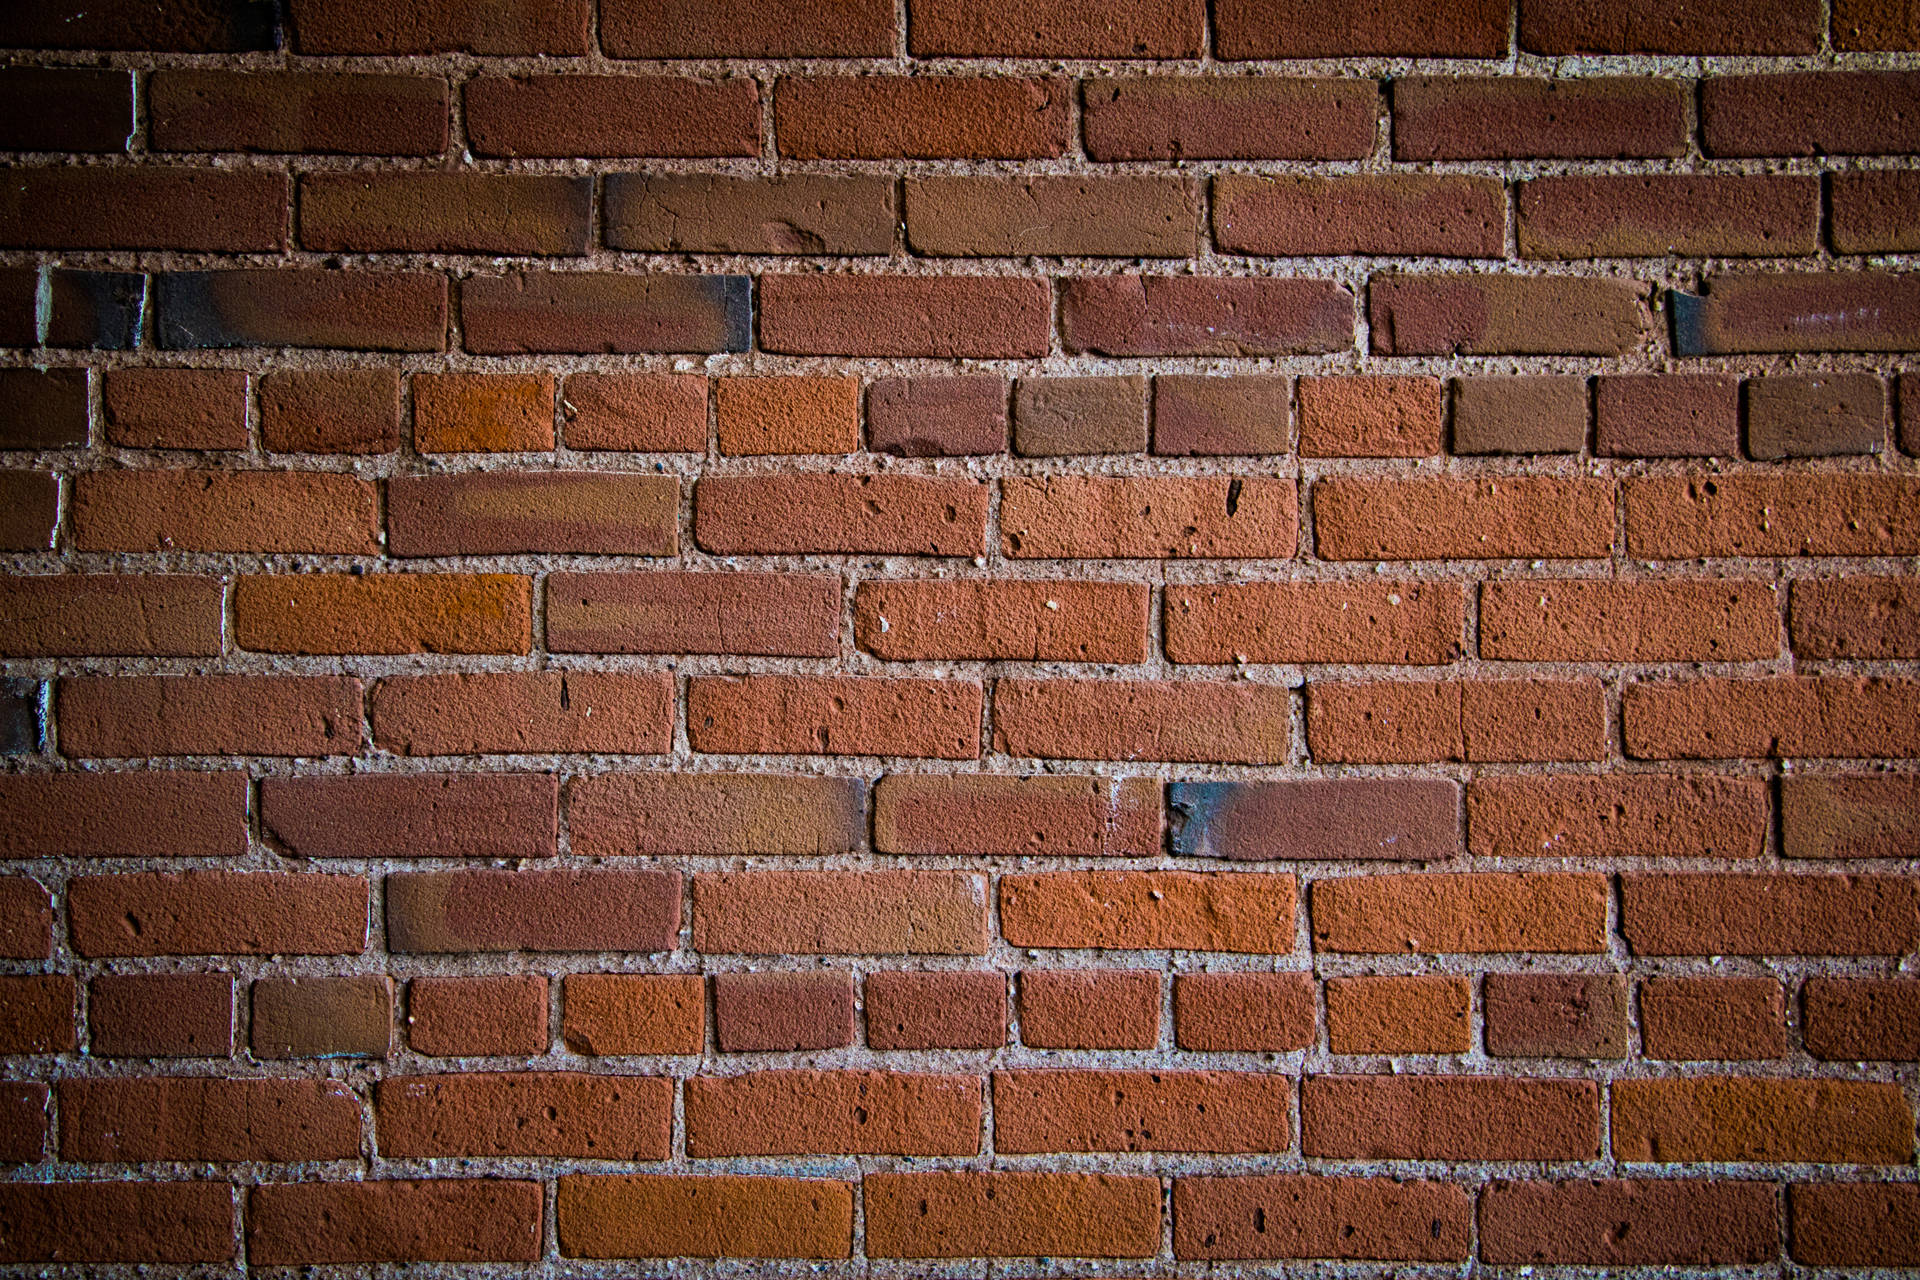 Brick 6000X4000 Wallpaper and Background Image